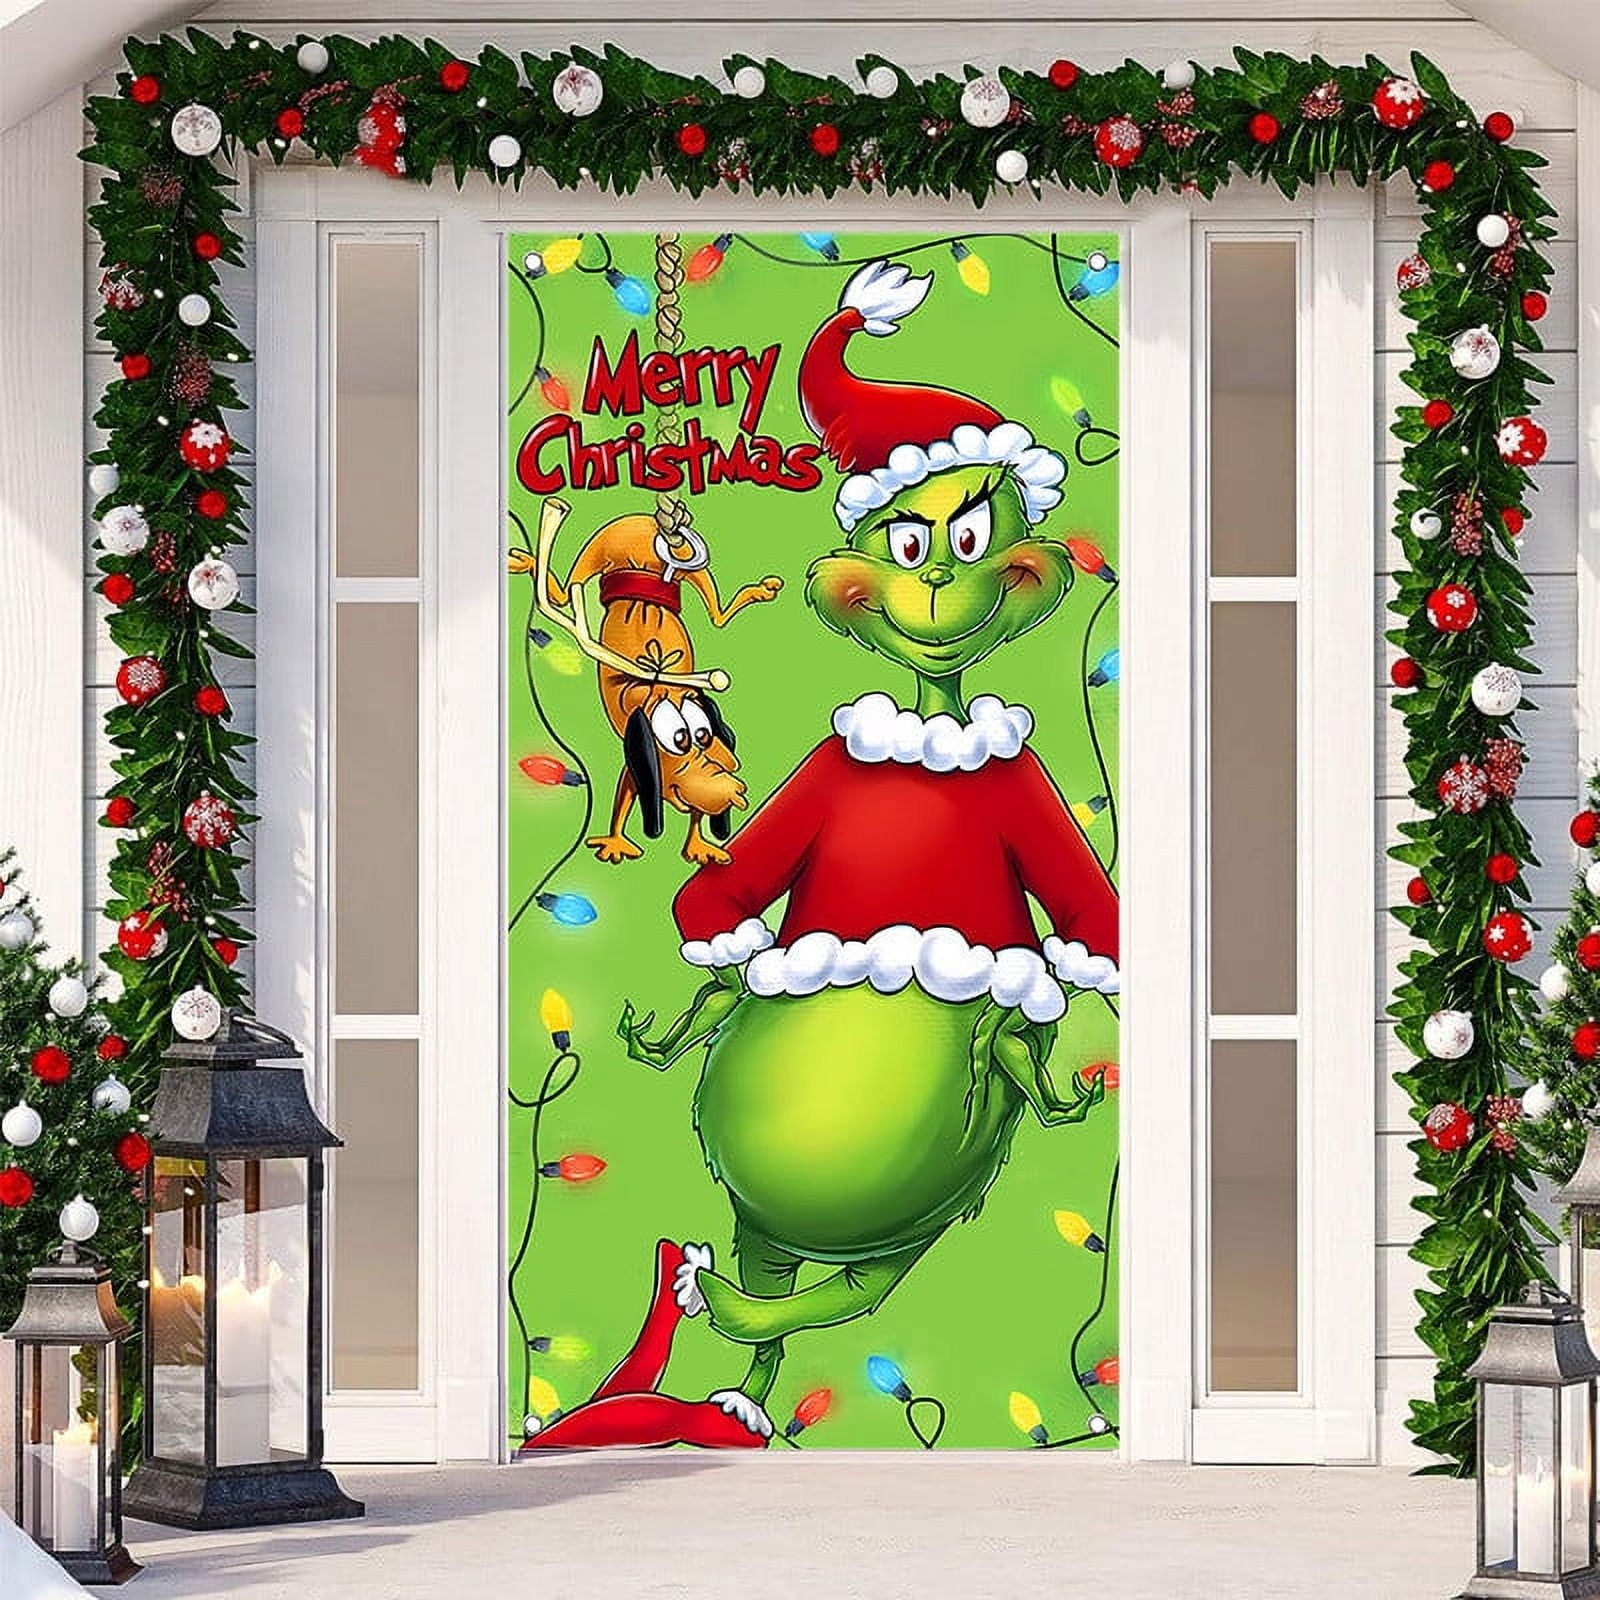 GRINCH WATER LABELS, Grinch Party, Christmas Party, Water Bottle